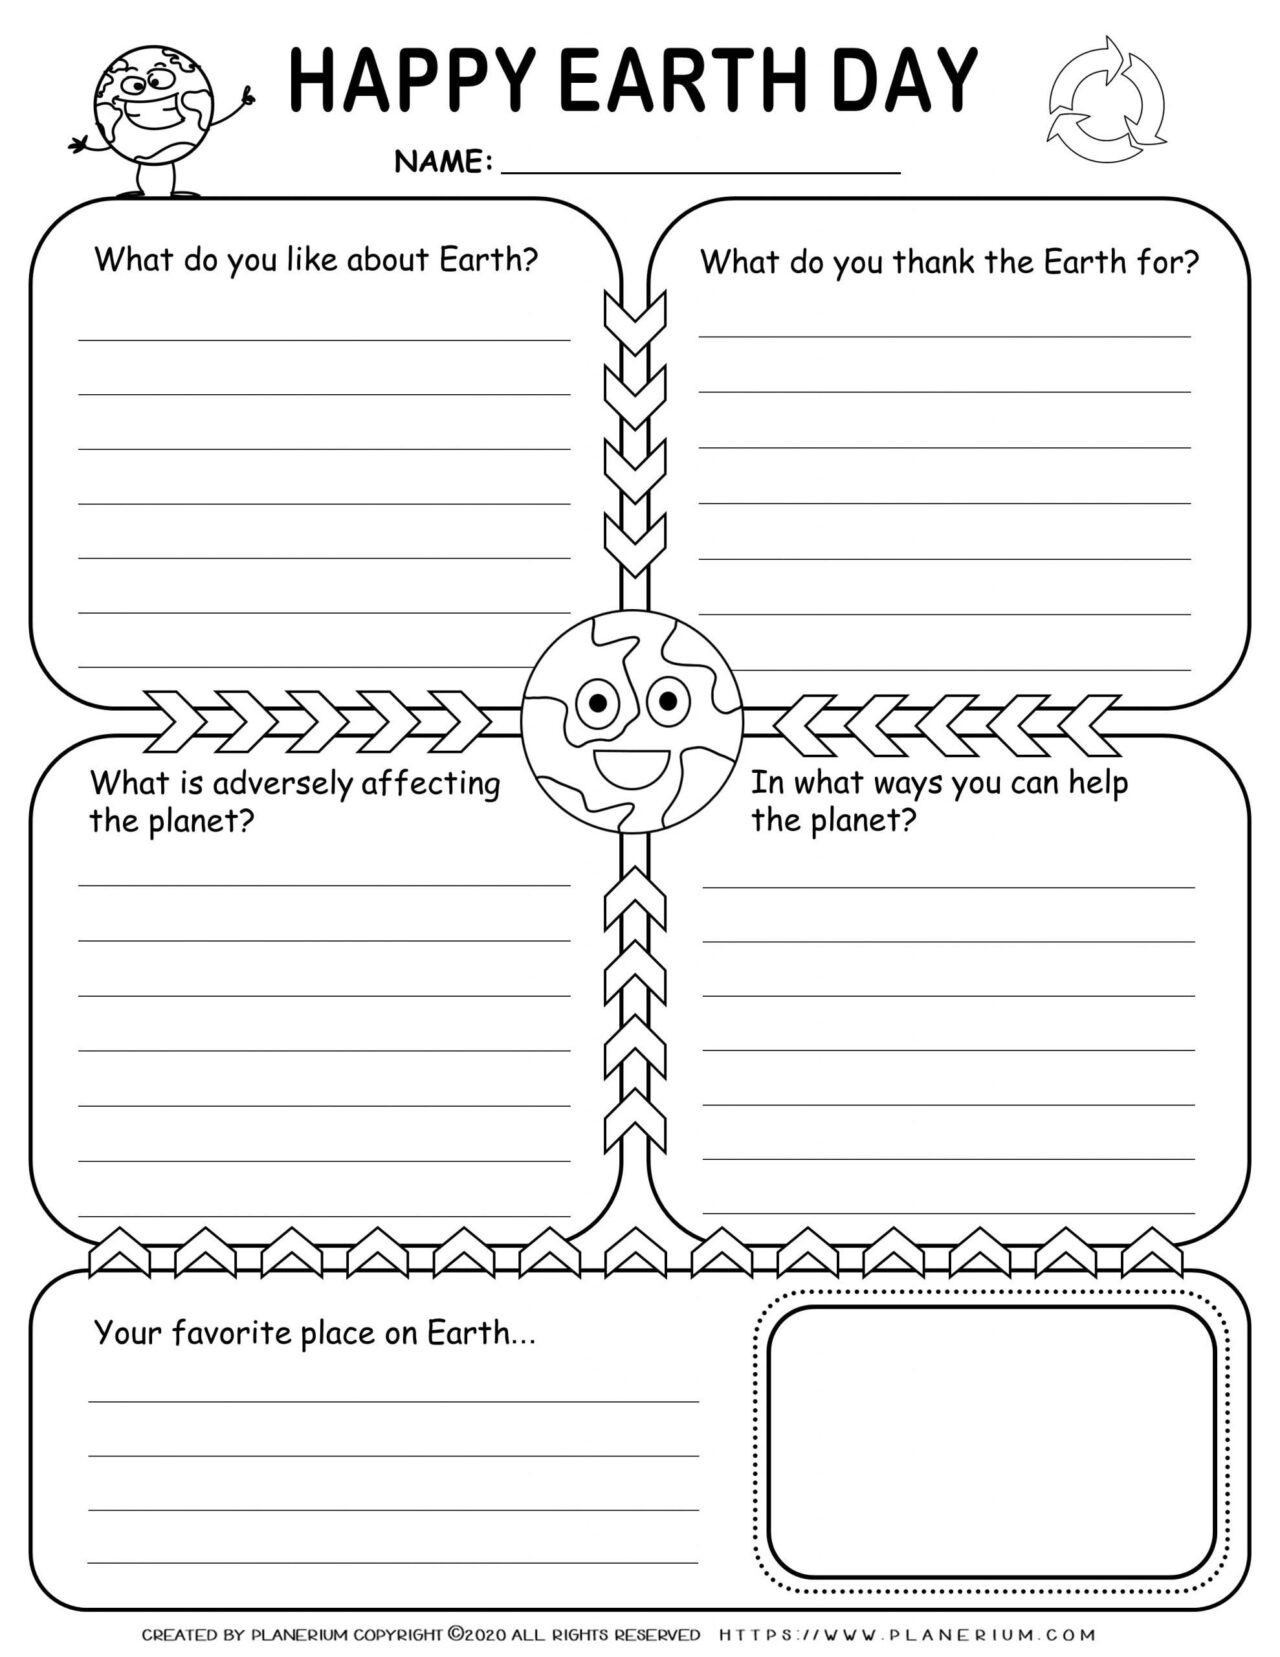 Earth Day Worksheet - Writing About Earth Activity for Kids